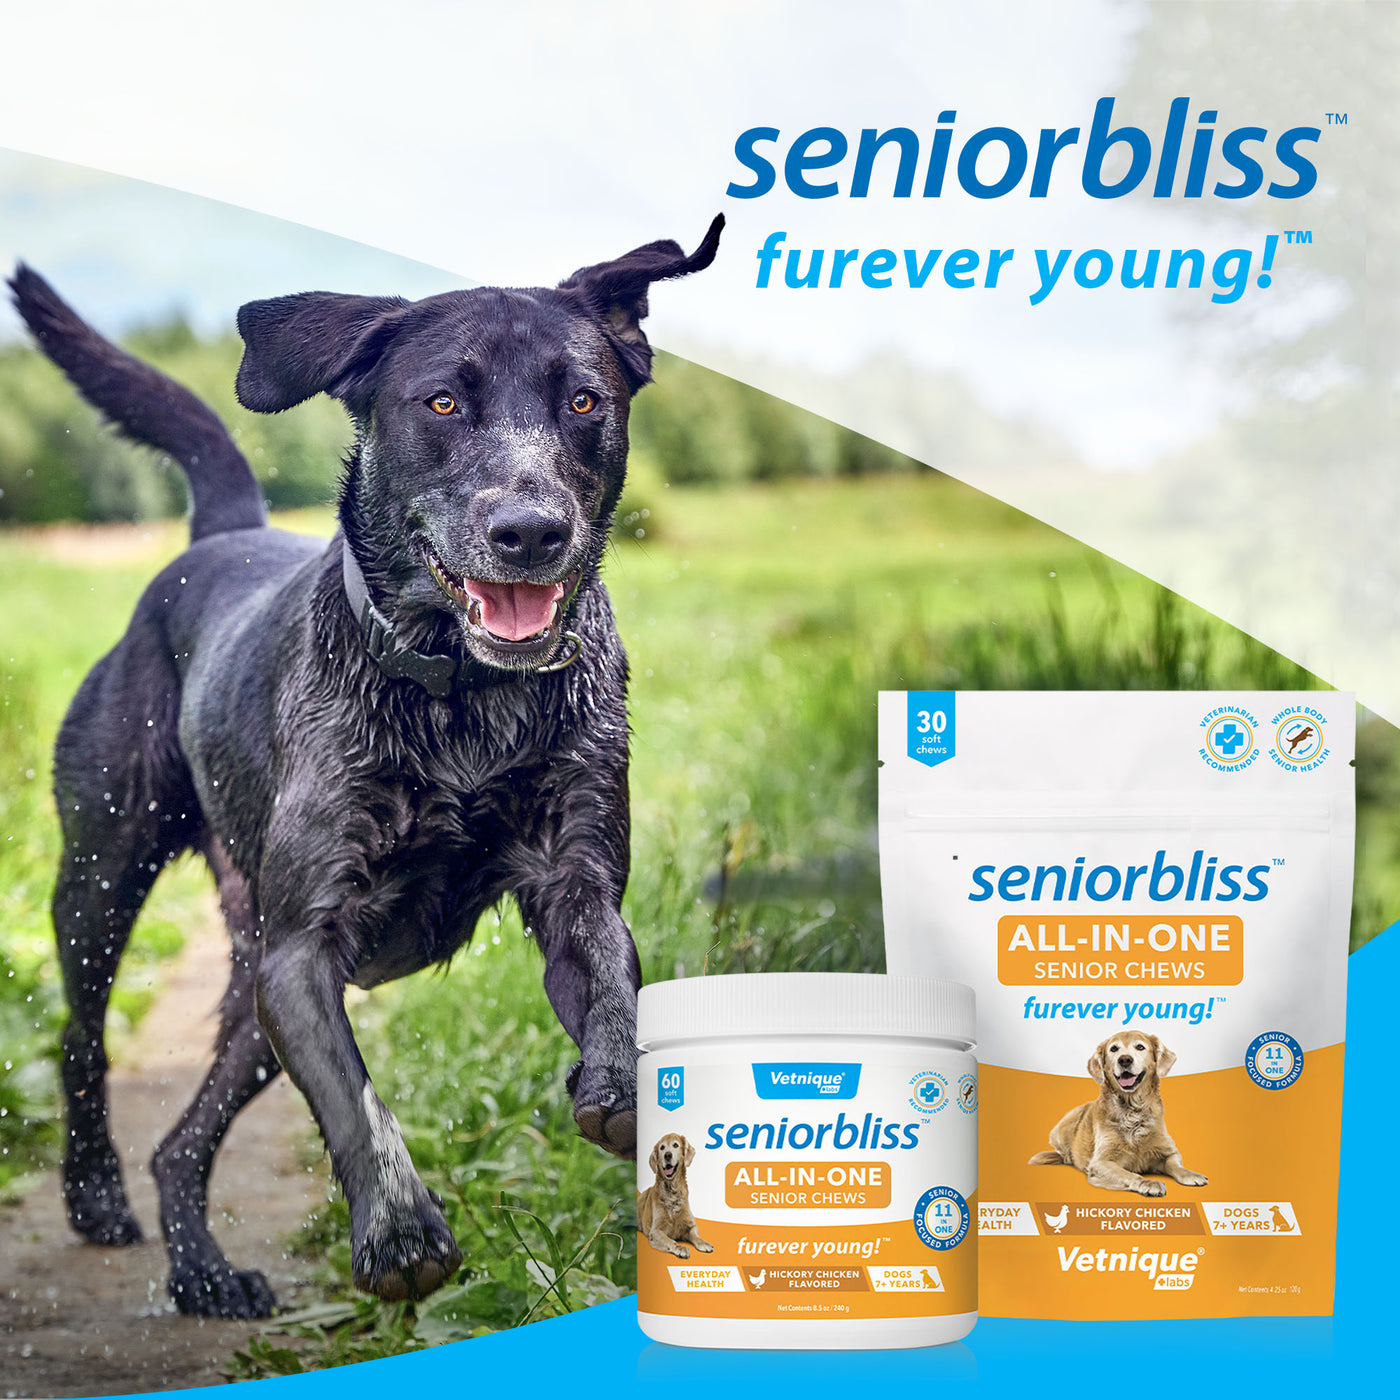 Seniorbliss™ All-in-One Supplement for Senior Dogs Furever young